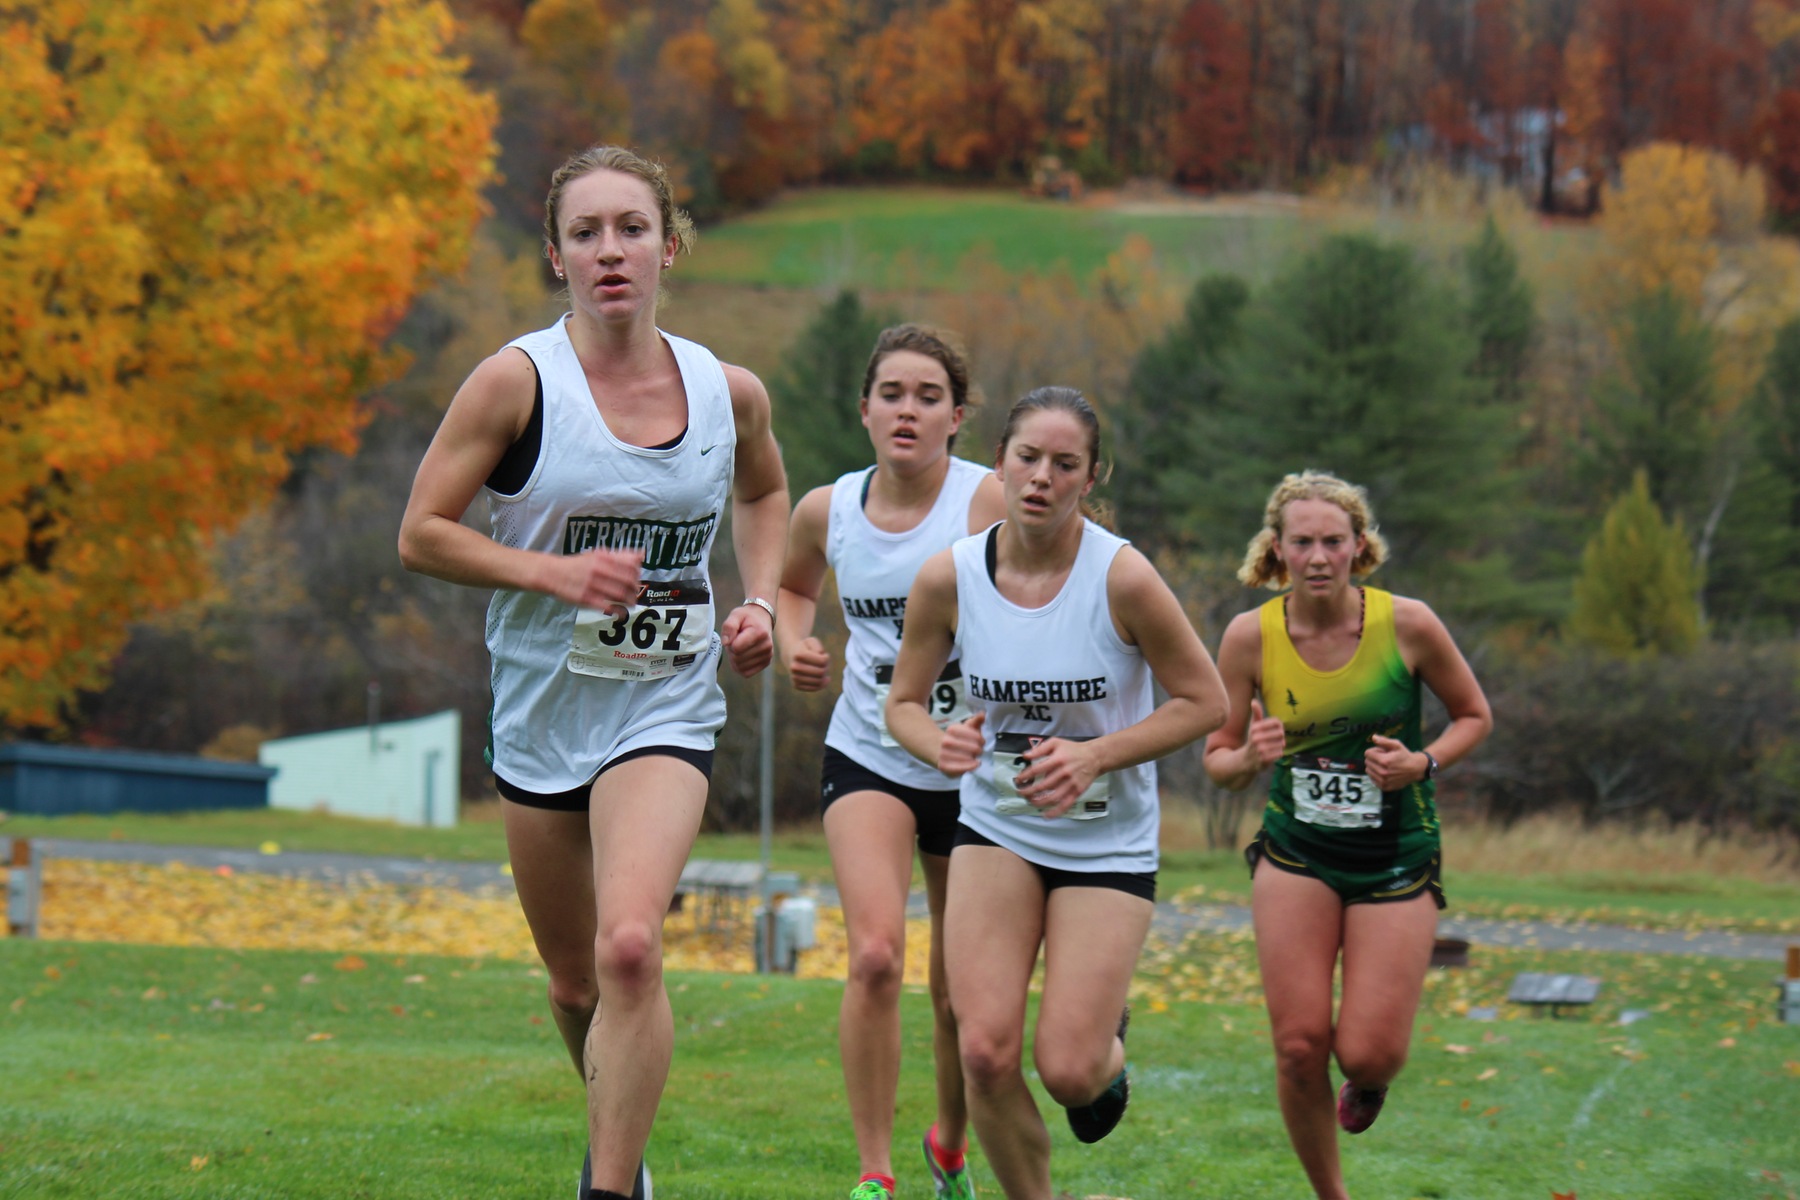 Vermont Tech Cross Country Invitational Race Proceeds to be donated to Hurricane Harvey victims